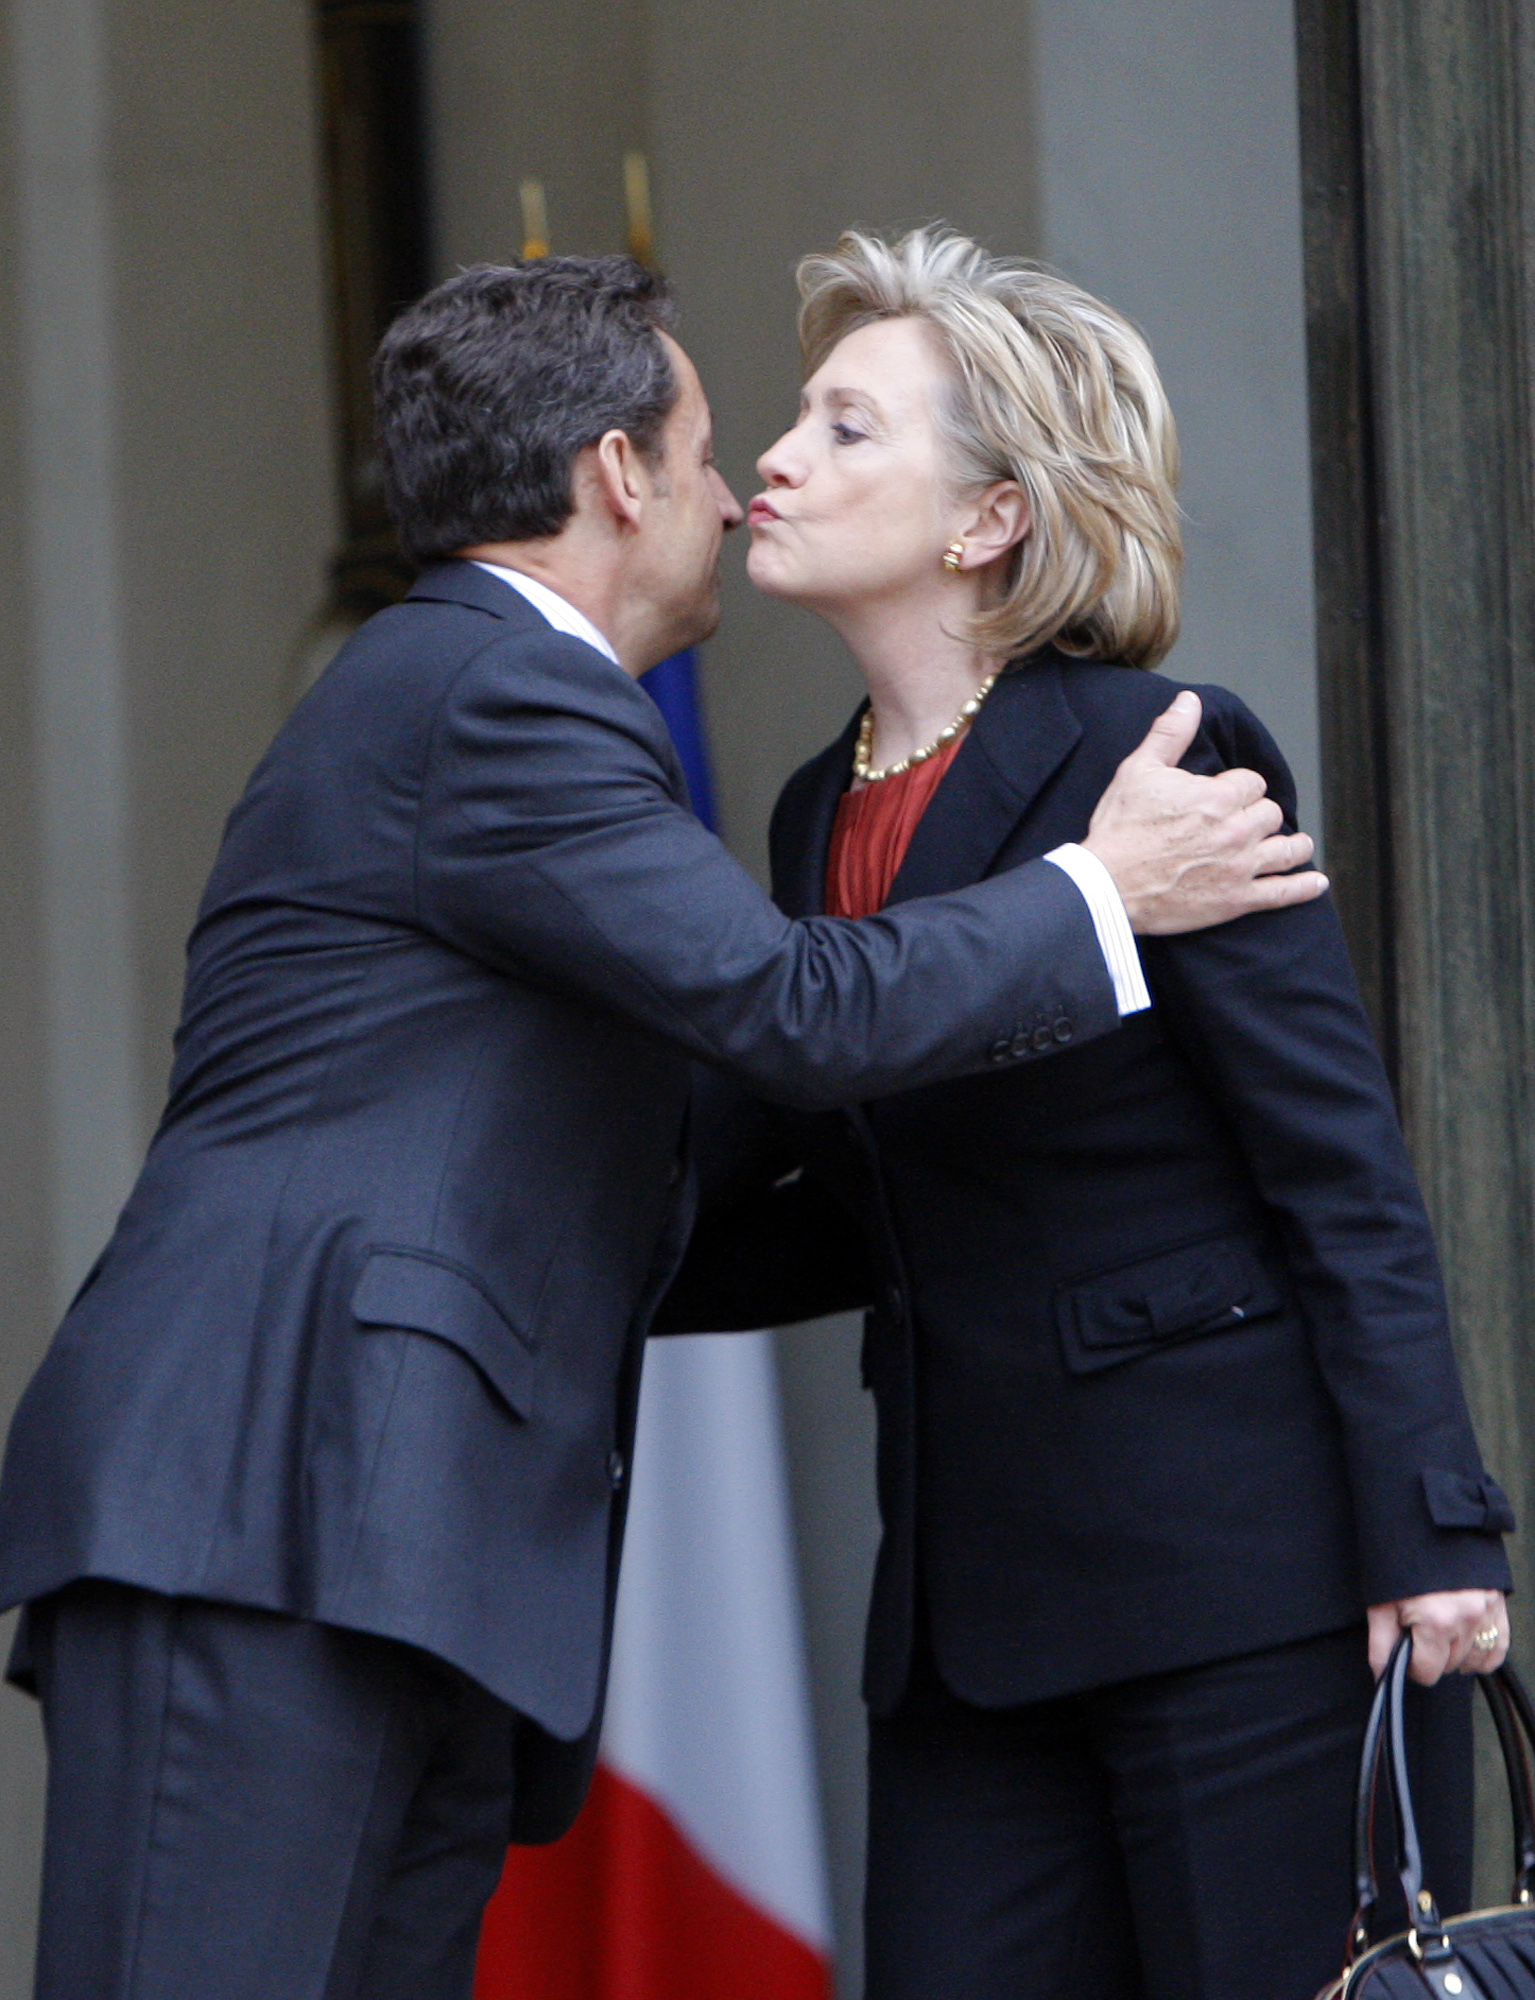 French President Nicolas Sarkozy, left, kisses goodbye to U.S. Secretary of State Hillary Rodham Clinton on the steps of the Elysee palace after their meeting on Jan. 29, 2010 in Paris.